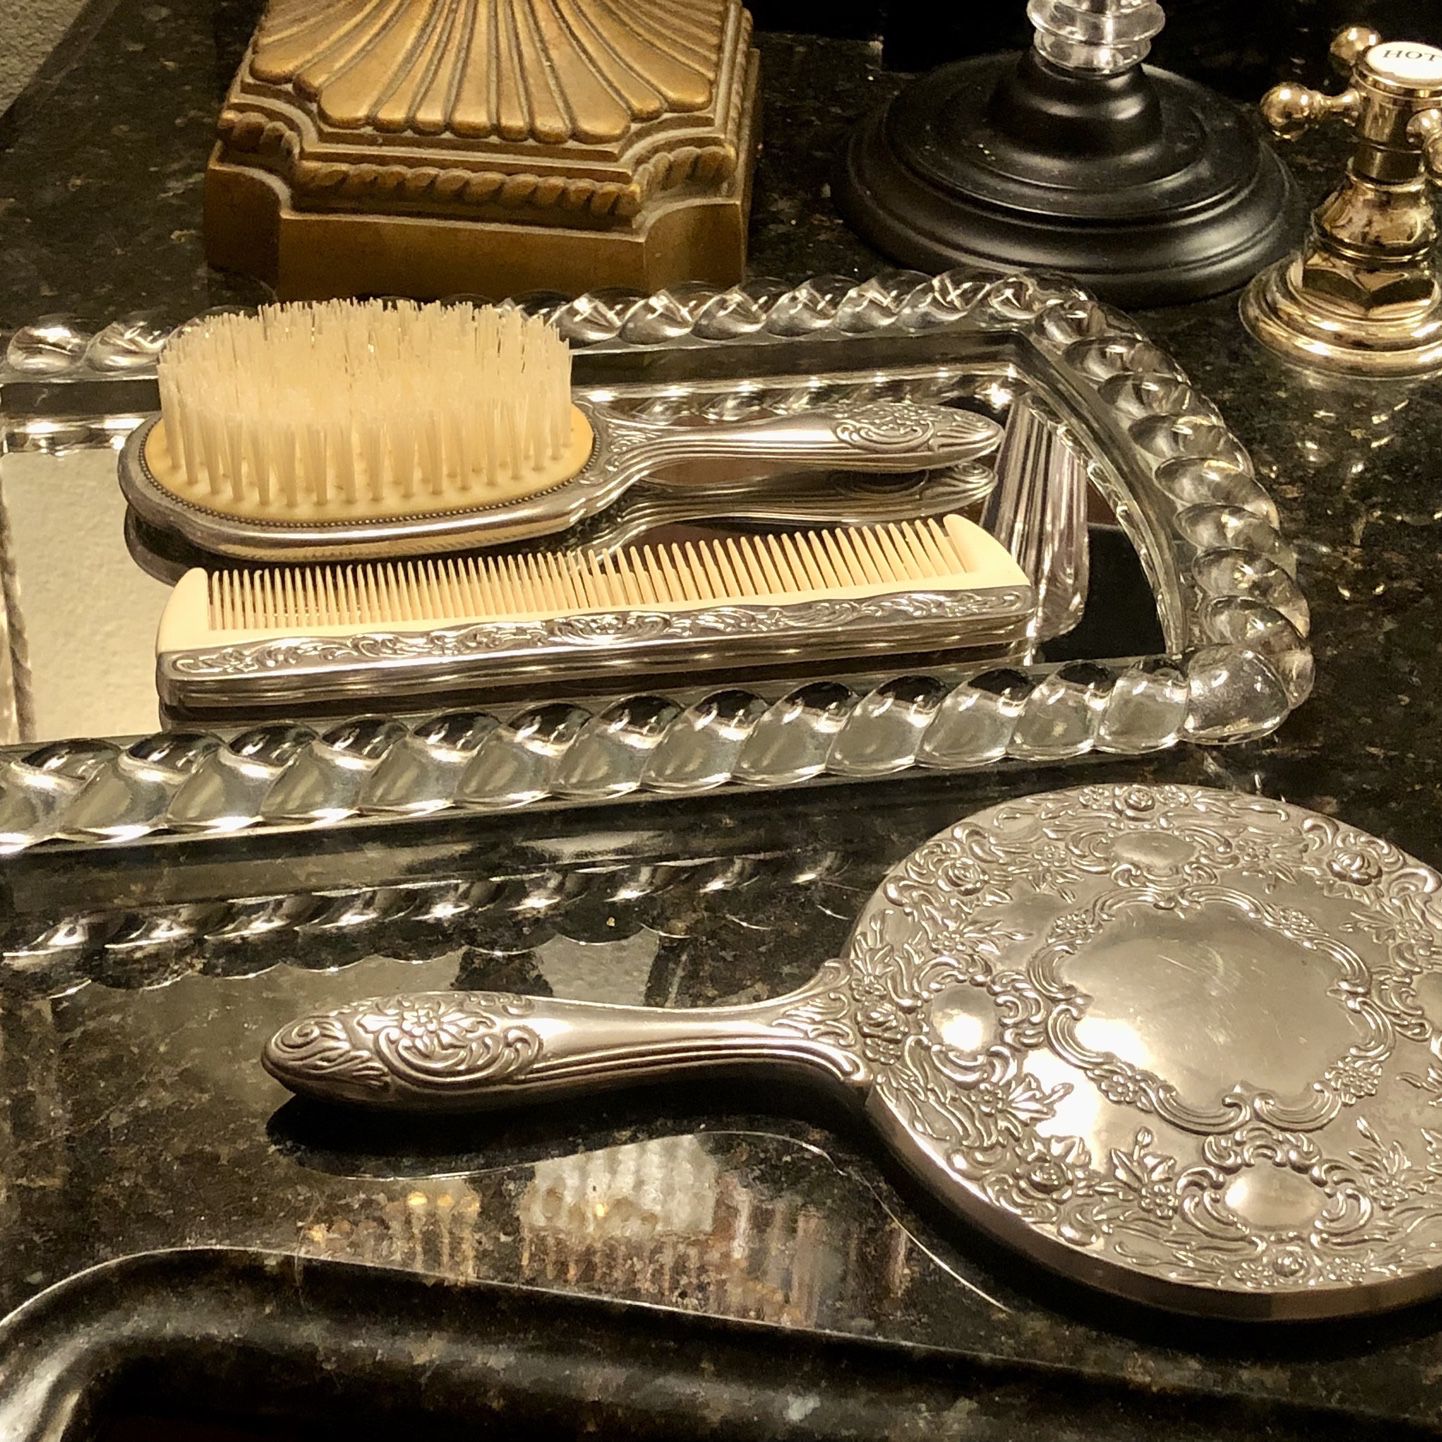 Beautiful Vintage Silver Plated 3 Piece Vanity Set With 1940’s Glass Braided Rope Mirrored Jewelry Tray